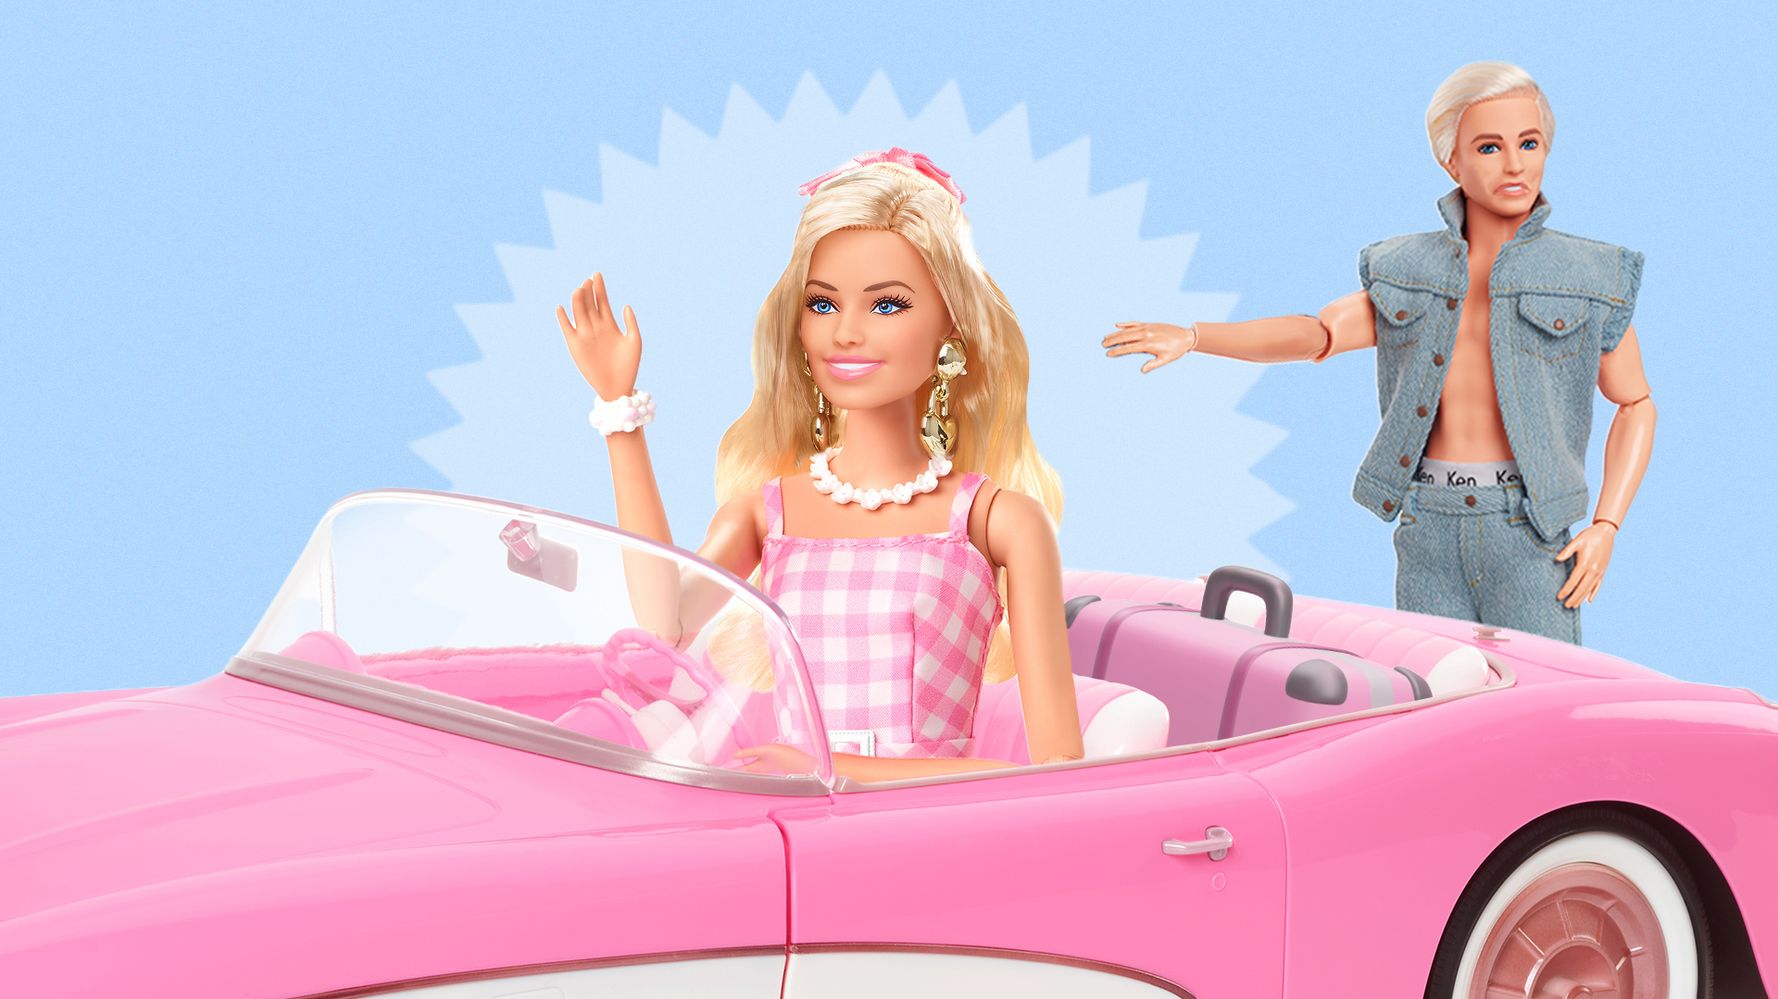 Giving Barbie a date. Also, is there anyone out there who DIDN'T